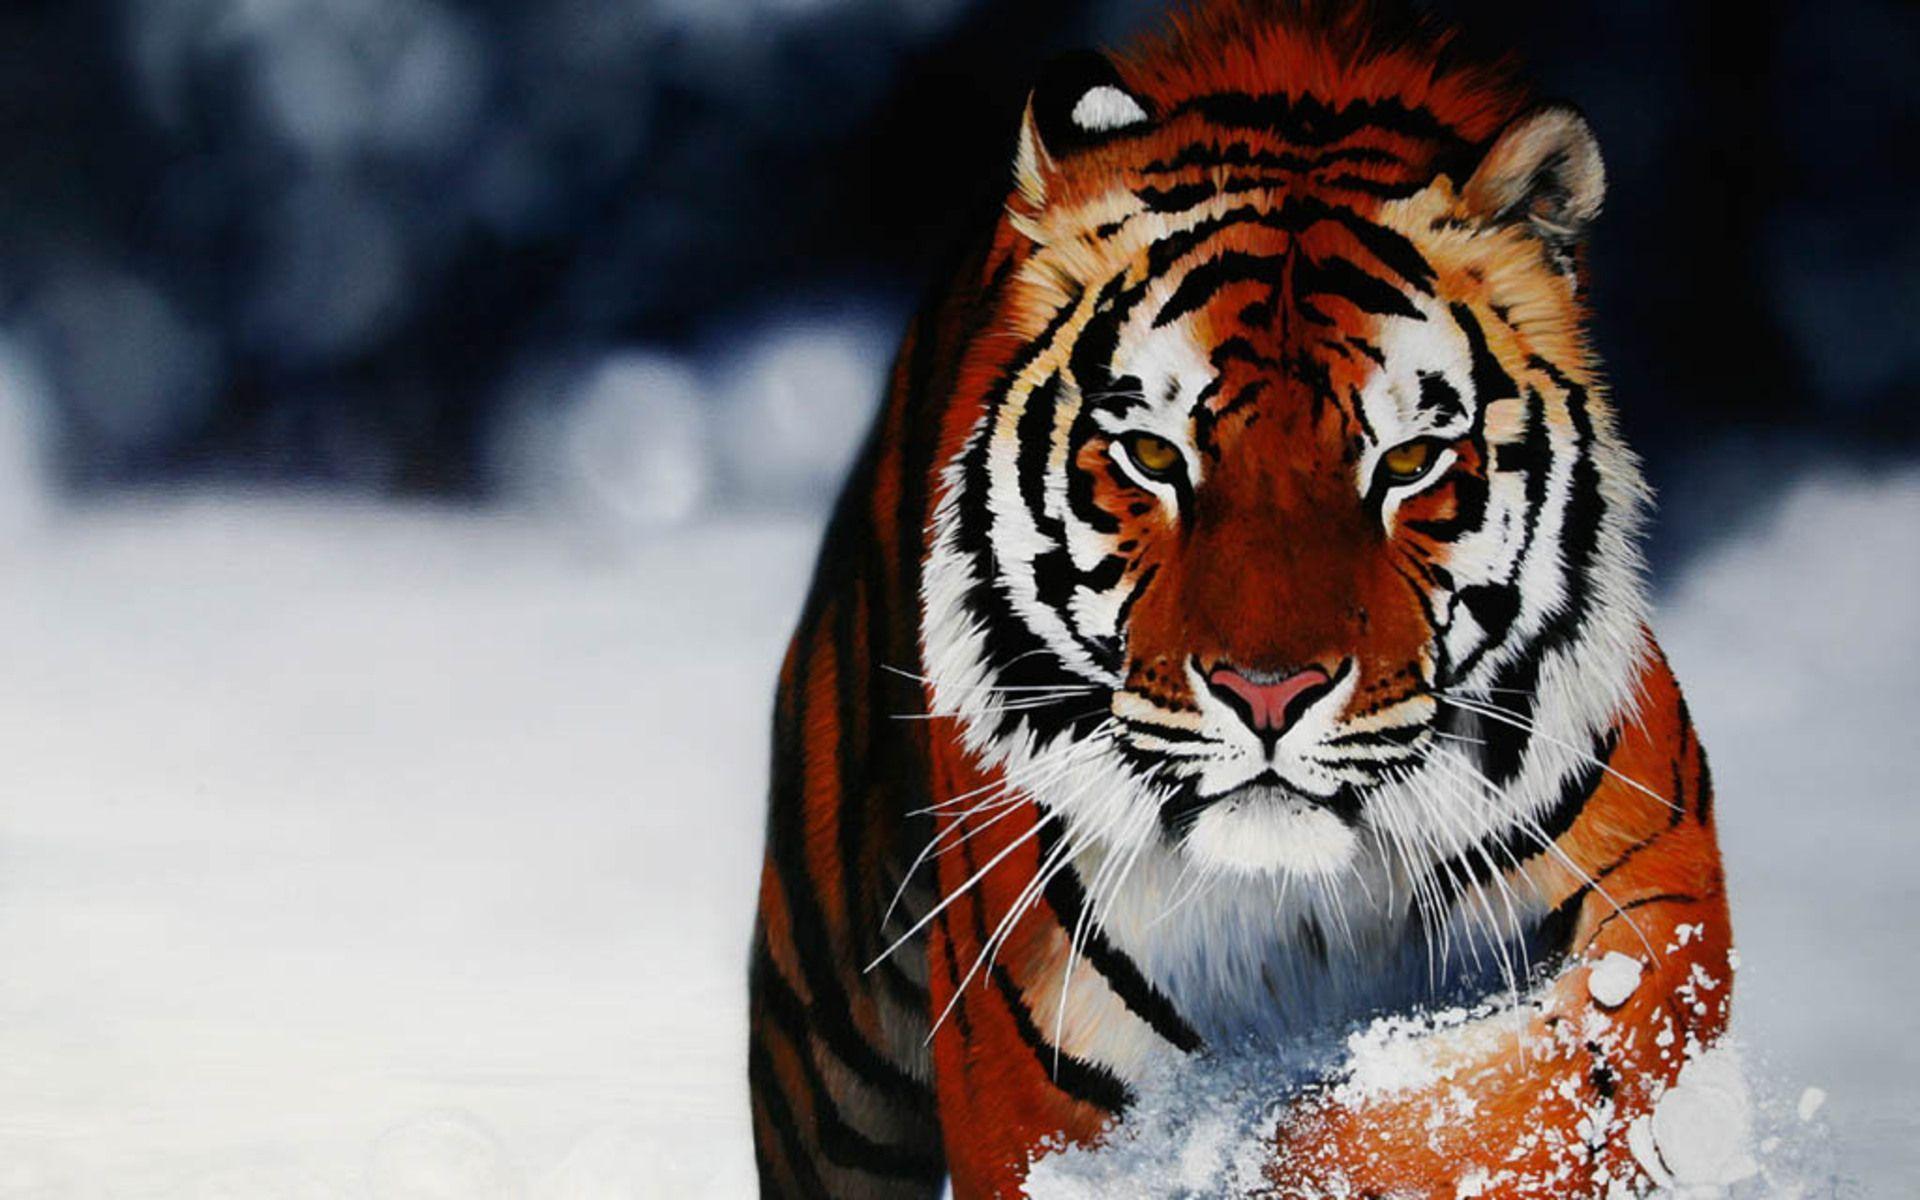 A selection of 10 Image of Tigers in HD quality